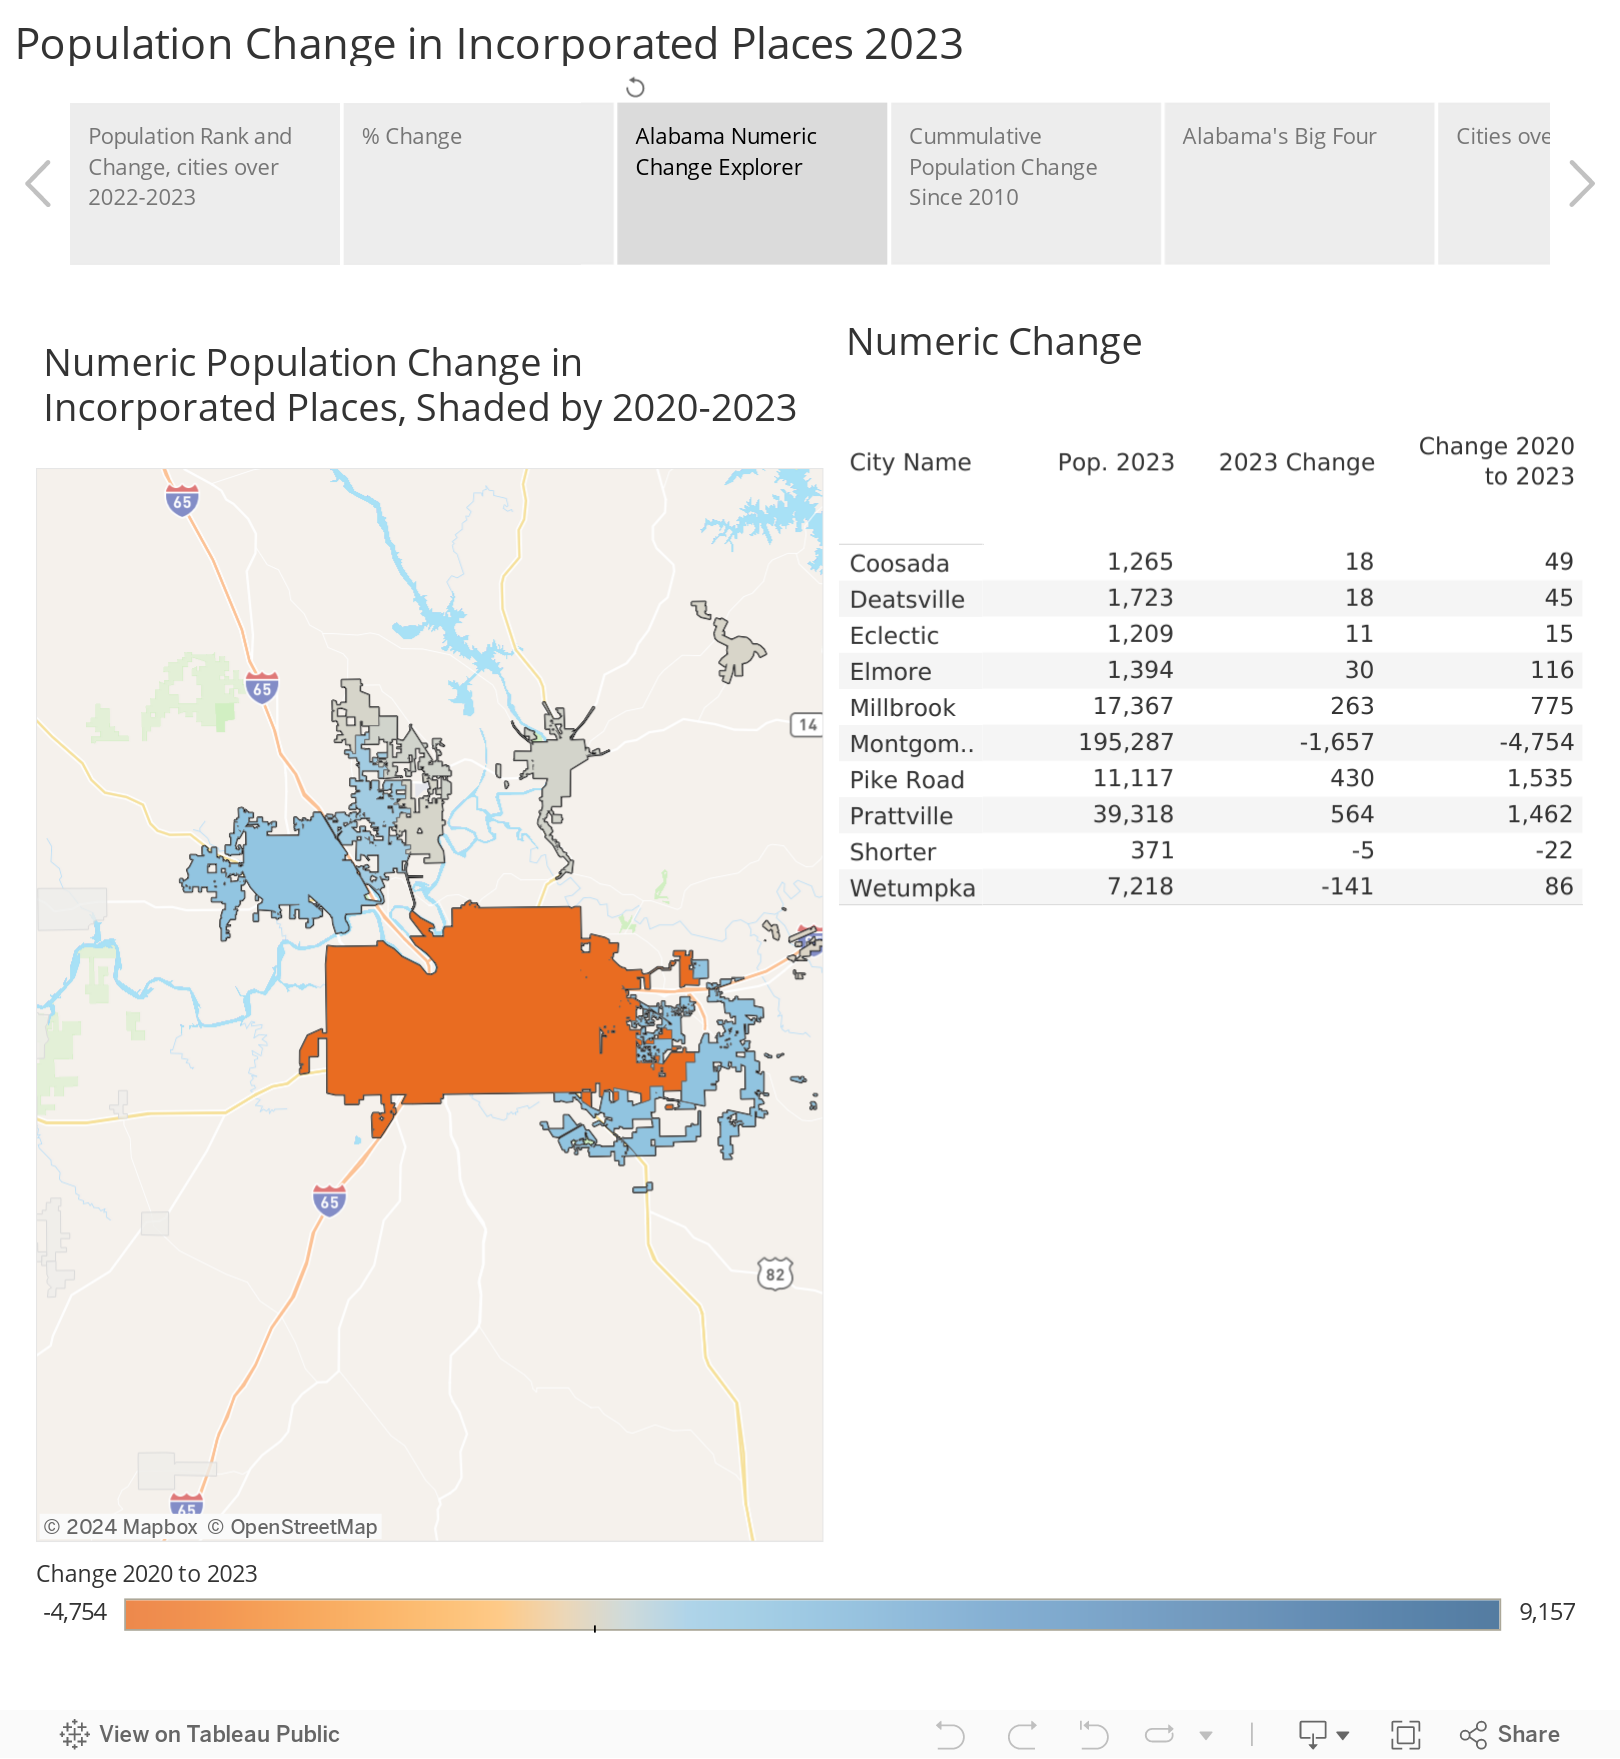 Population Change in Incorporated Places 2023 